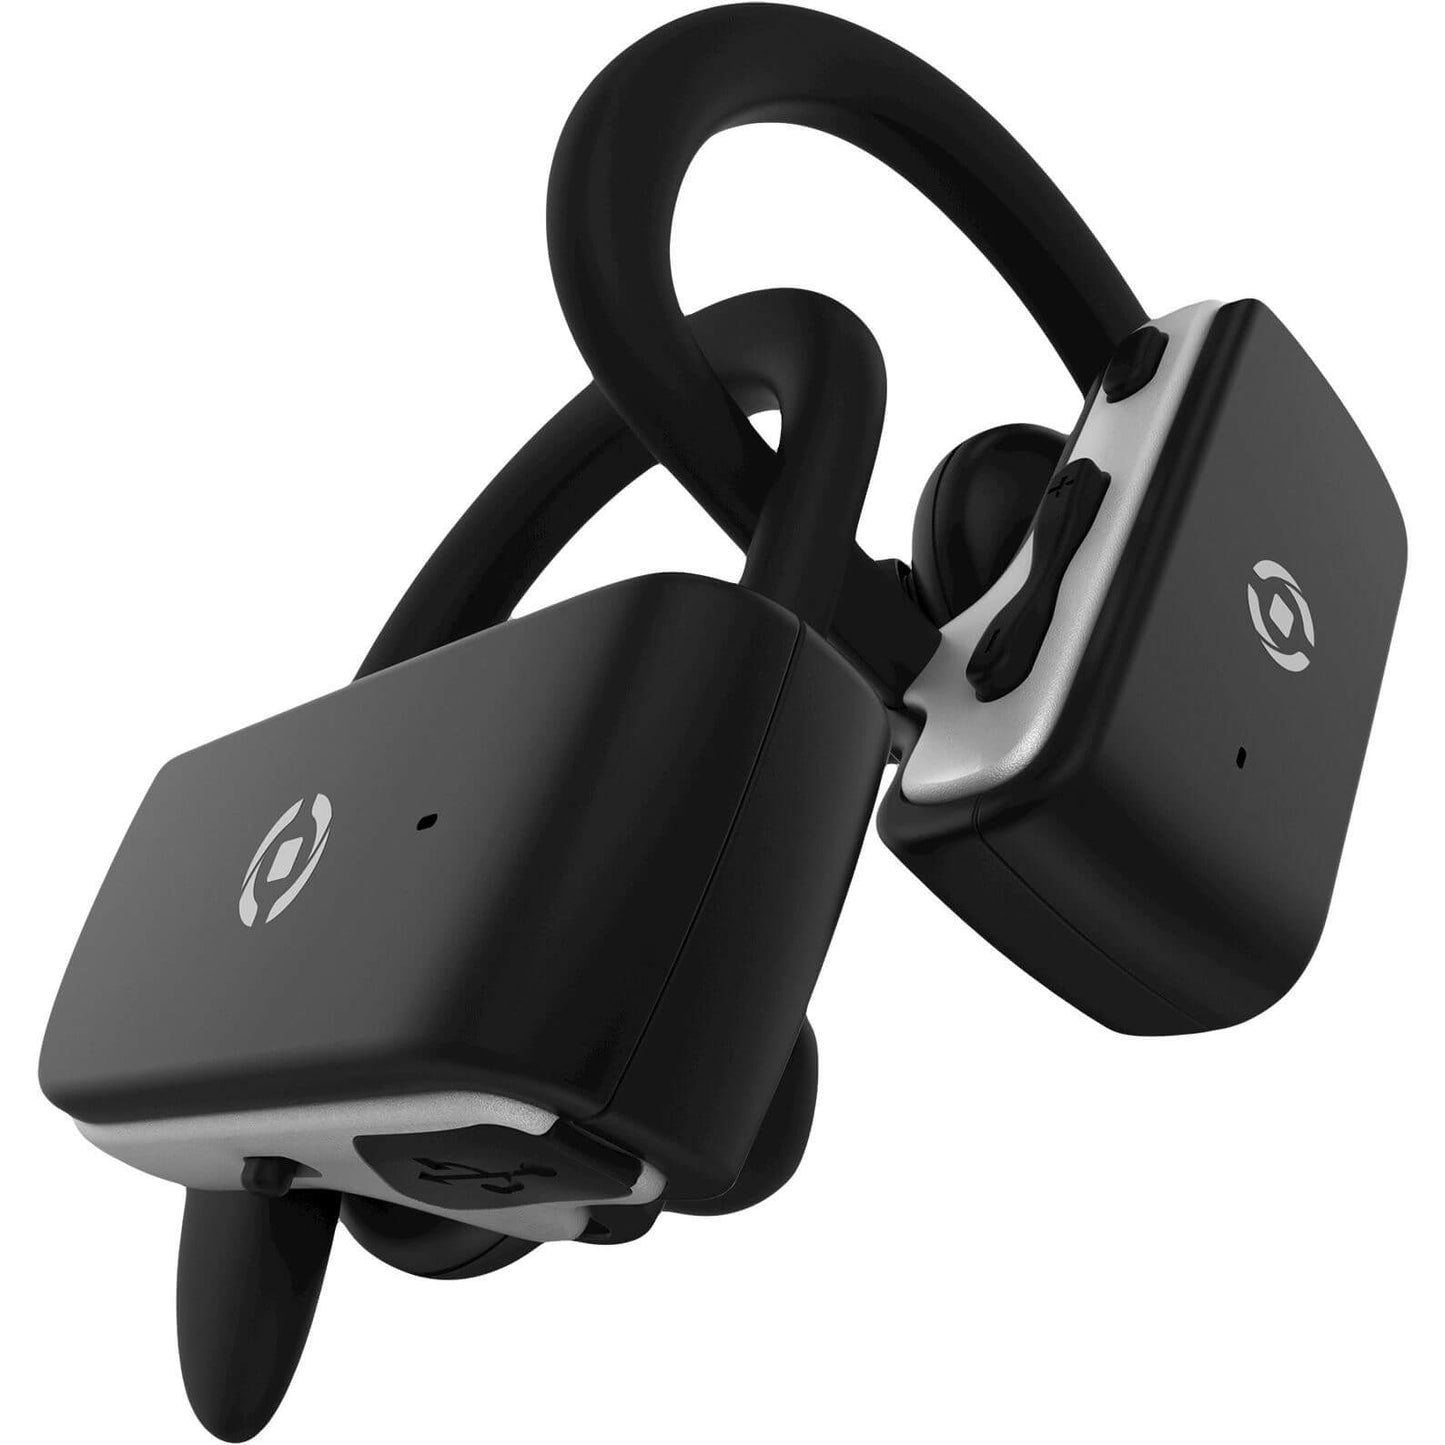 Celly auriculares bluetooth negro